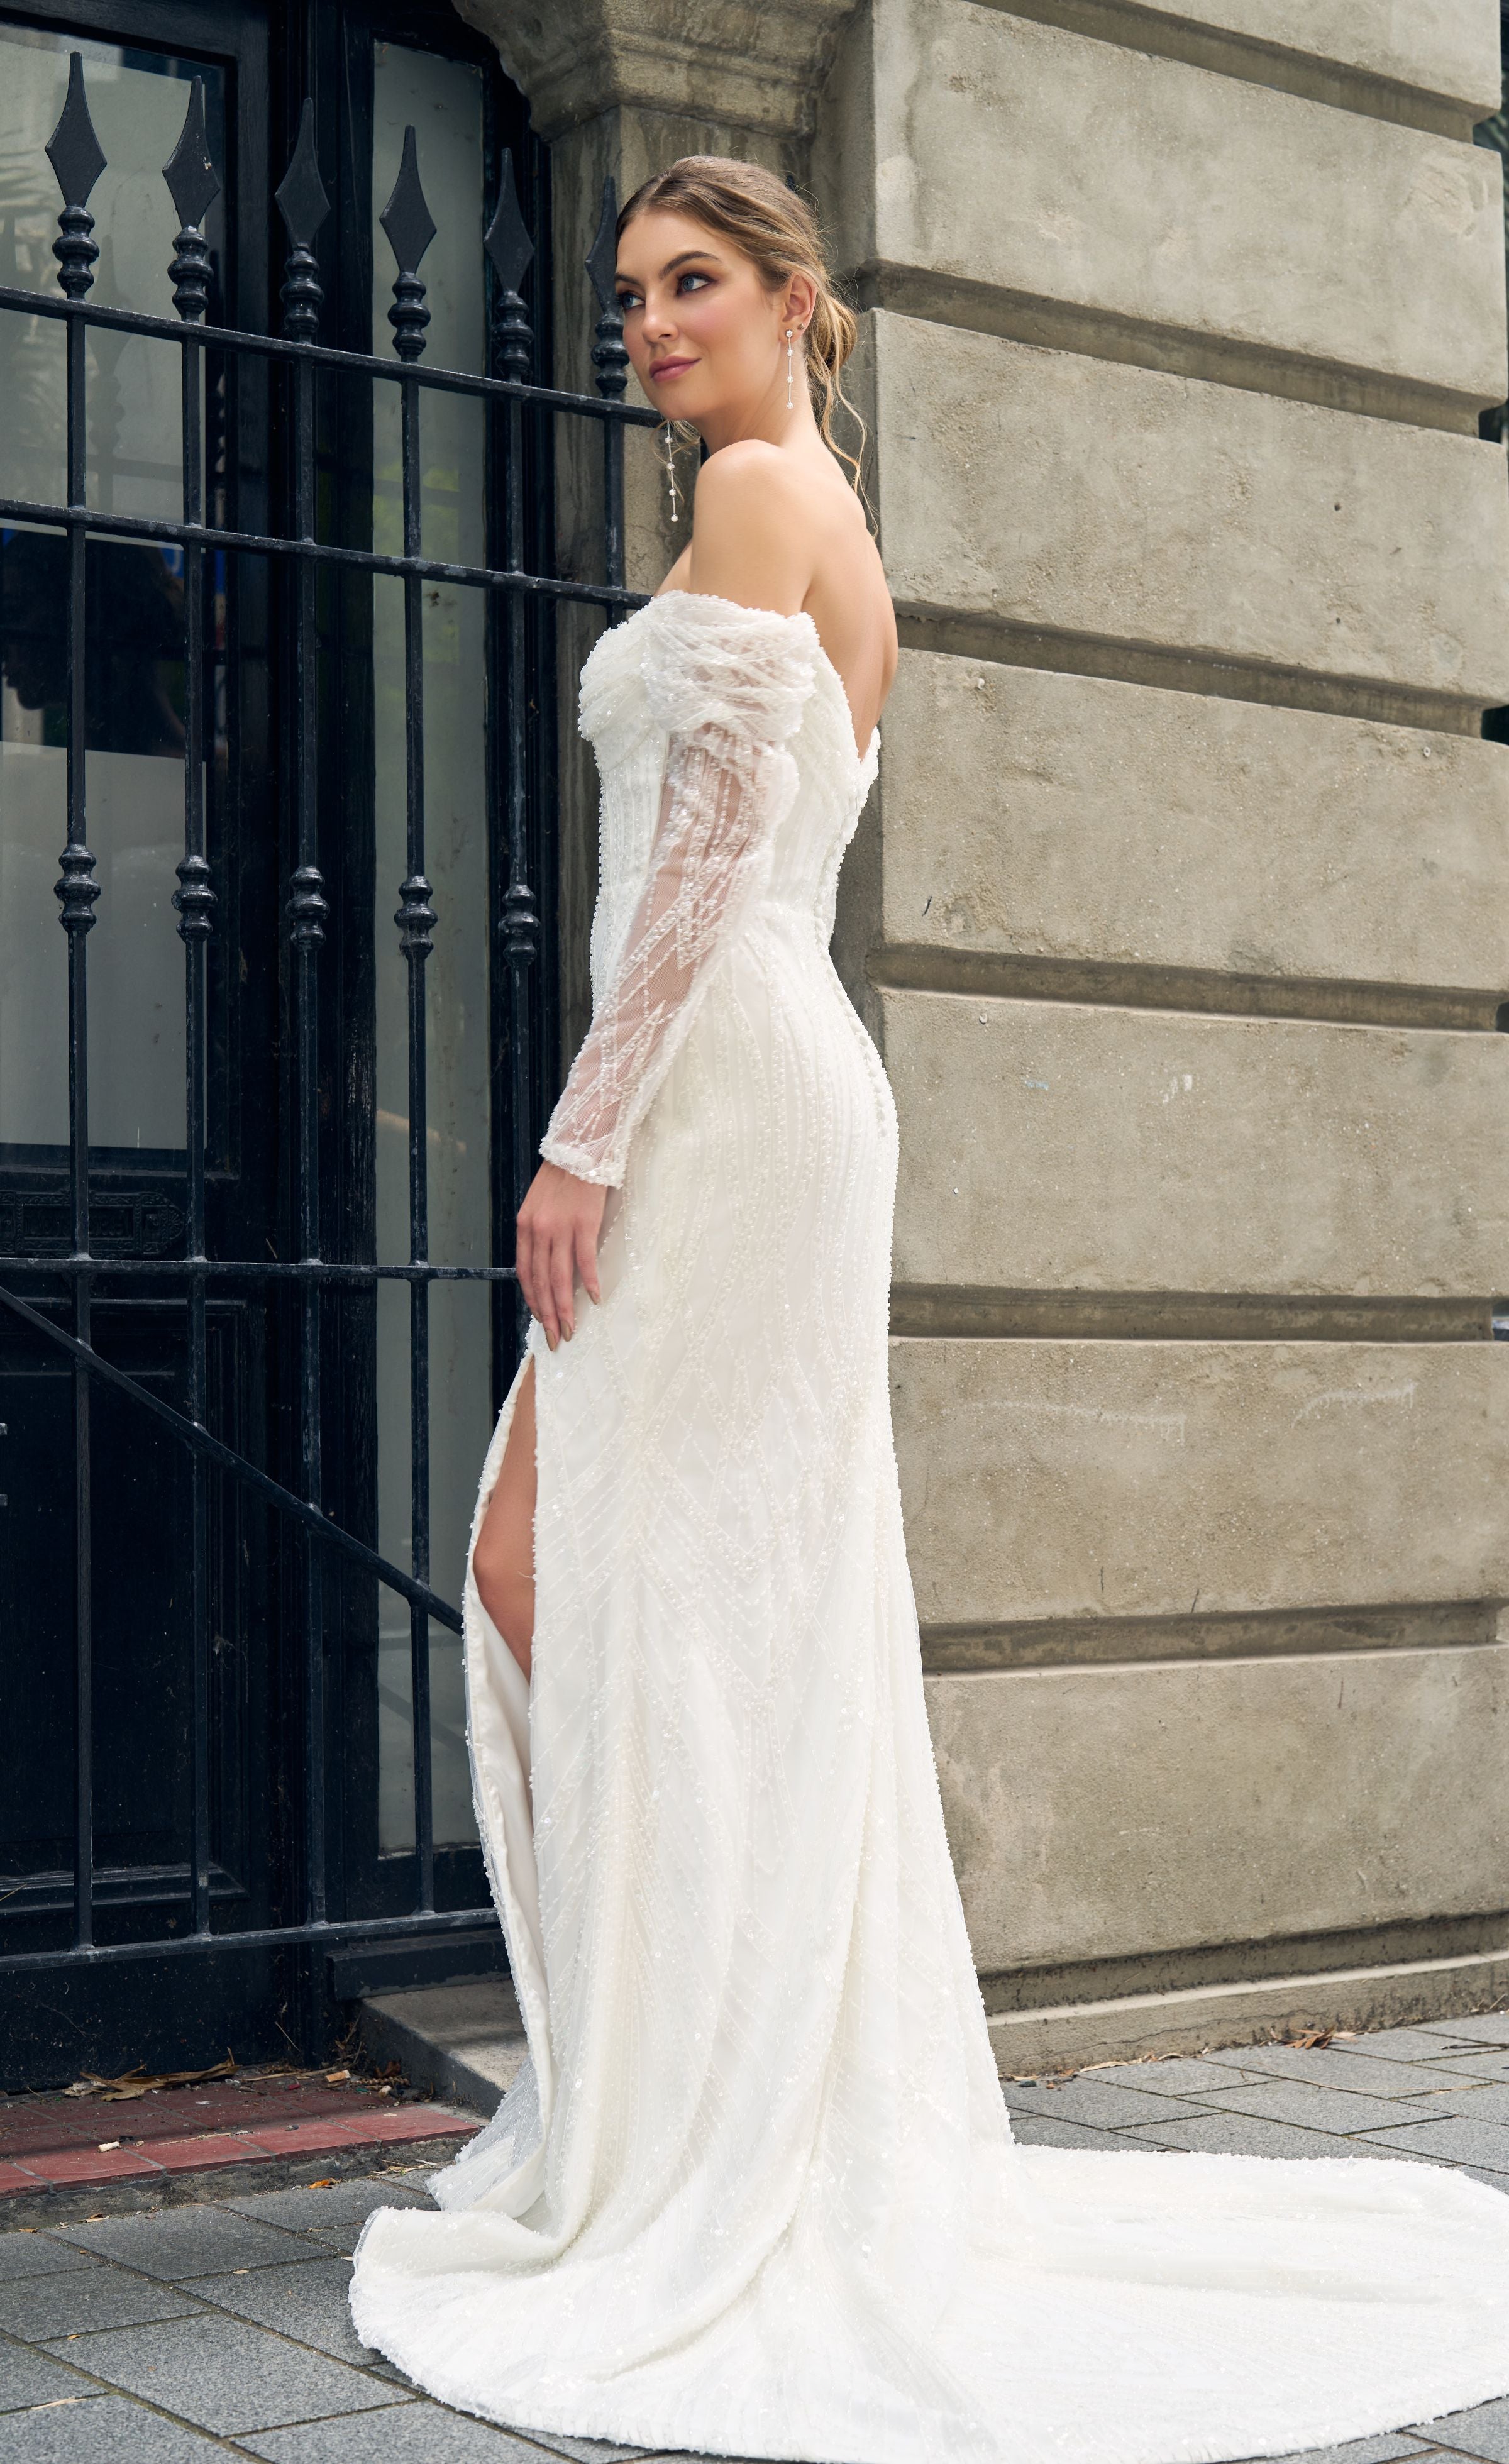 Fully beaded off the shoulder gown with sheer sleeves. Fit-n-flare silhouette, bust rouching and boned bodice.